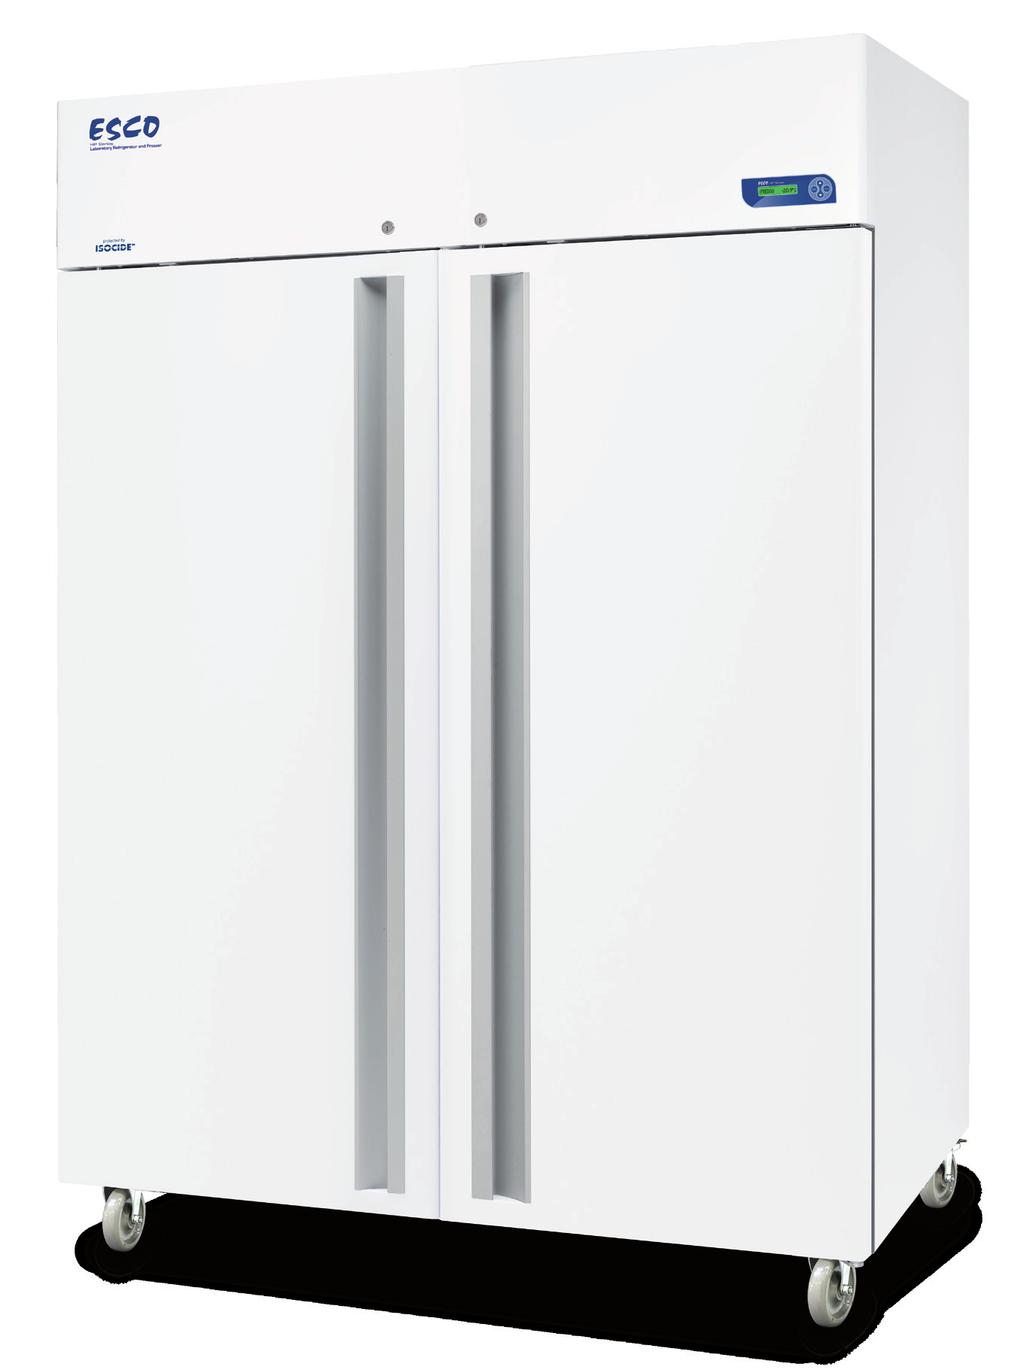 18 Laboratory Freezer Model: HF2-1500S Door Lock Provides additional security for expensive samples and reagents from unauthorized users Displays data about the unit and used to control temperature